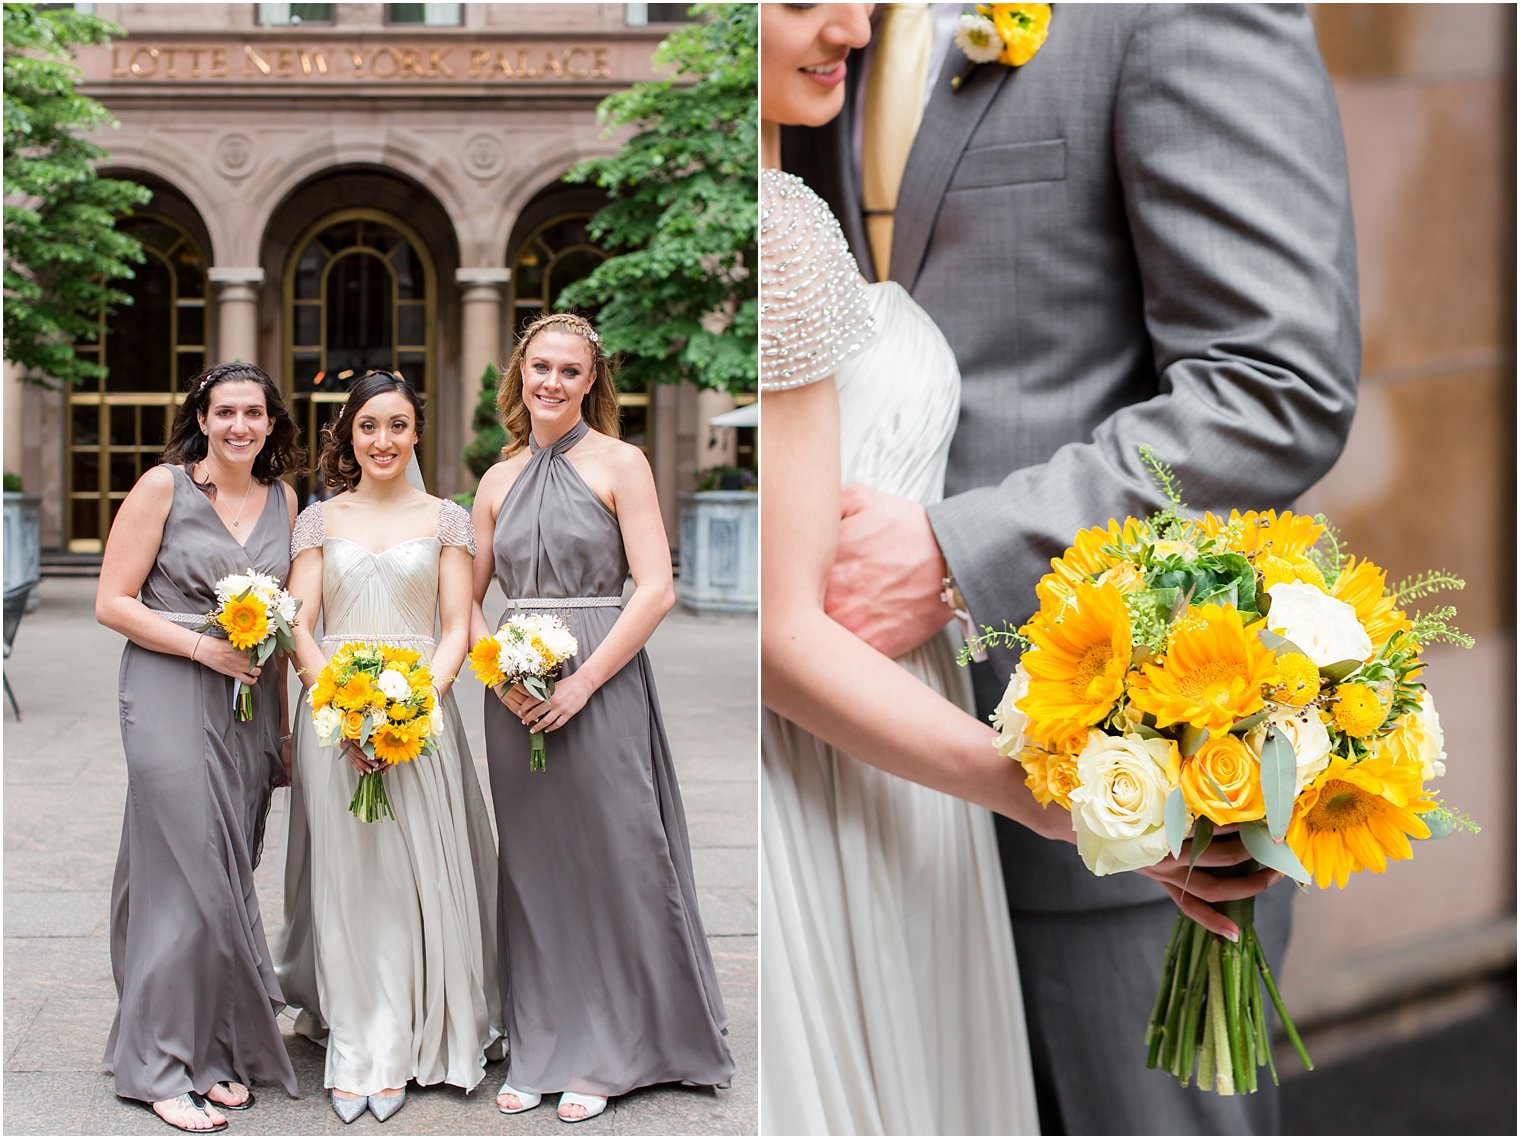 Gray and yellow wedding details